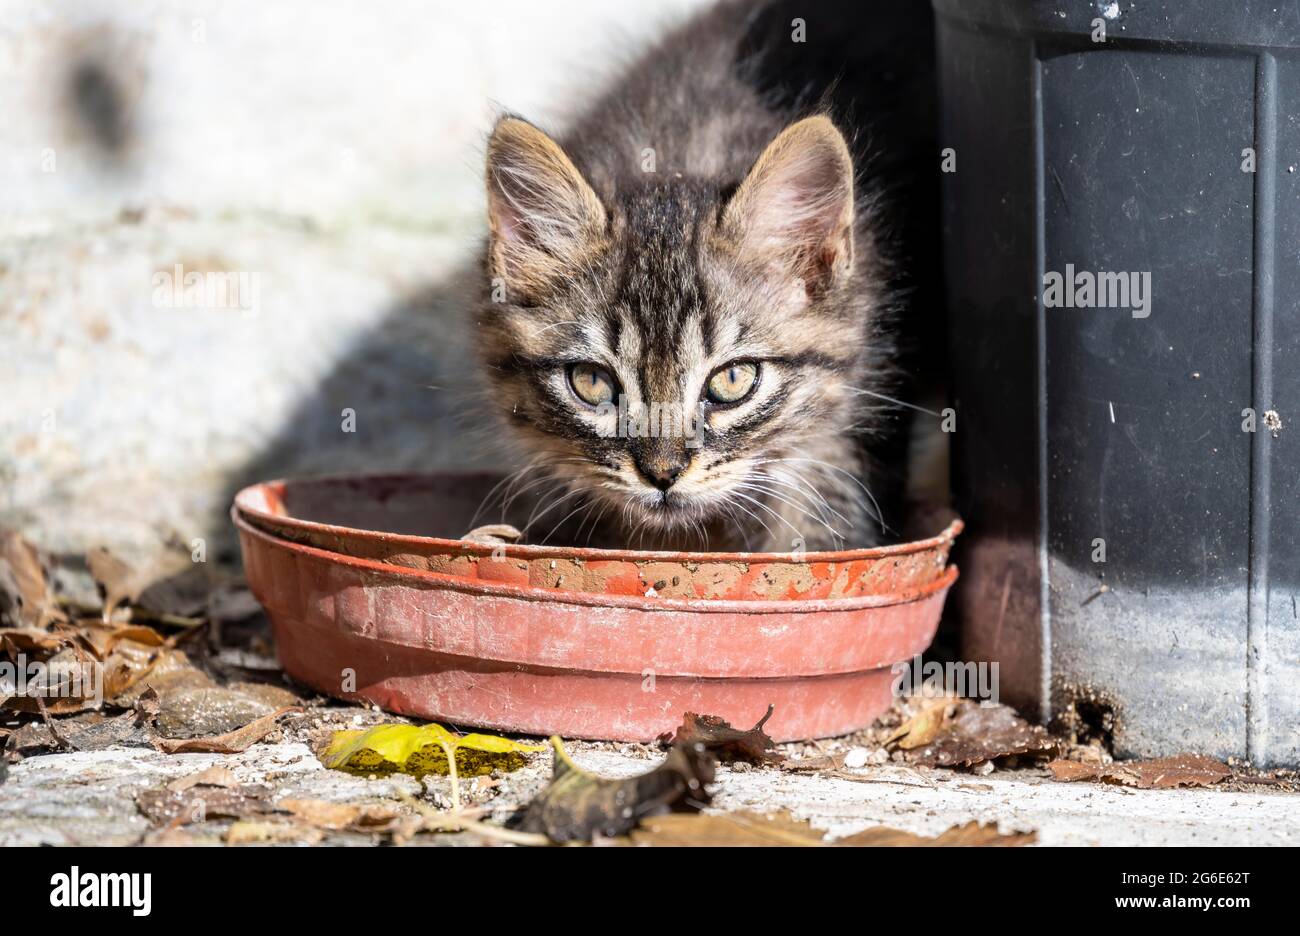 Baby cat drinking from a bowl, Paros, Cyclades, Aegean Sea, Greece Stock Photo